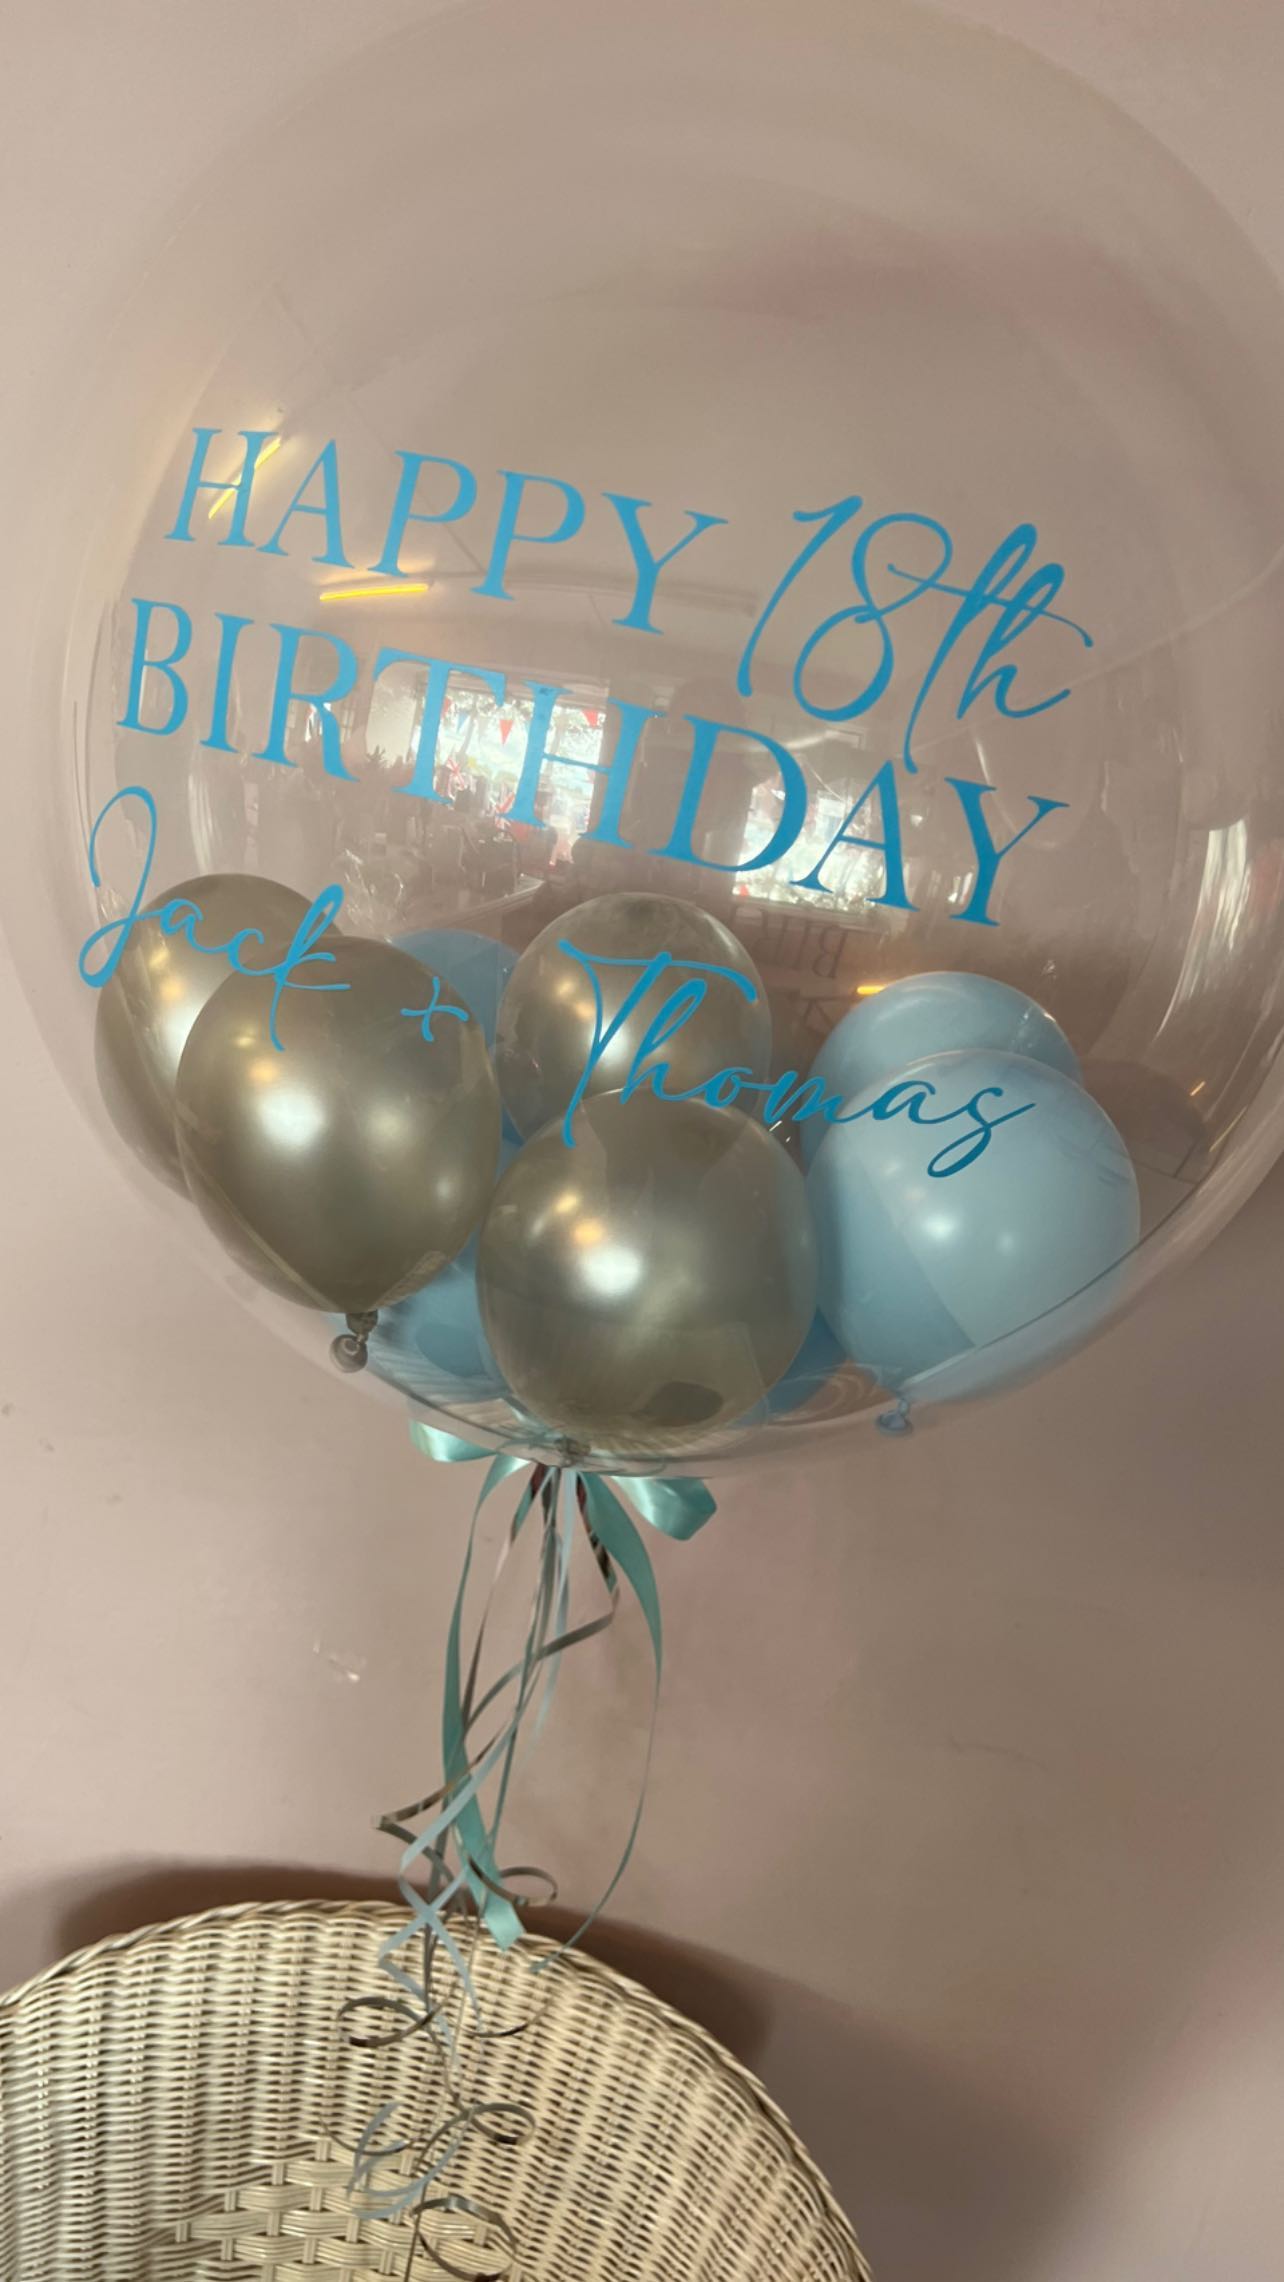 Balloons & Gifts